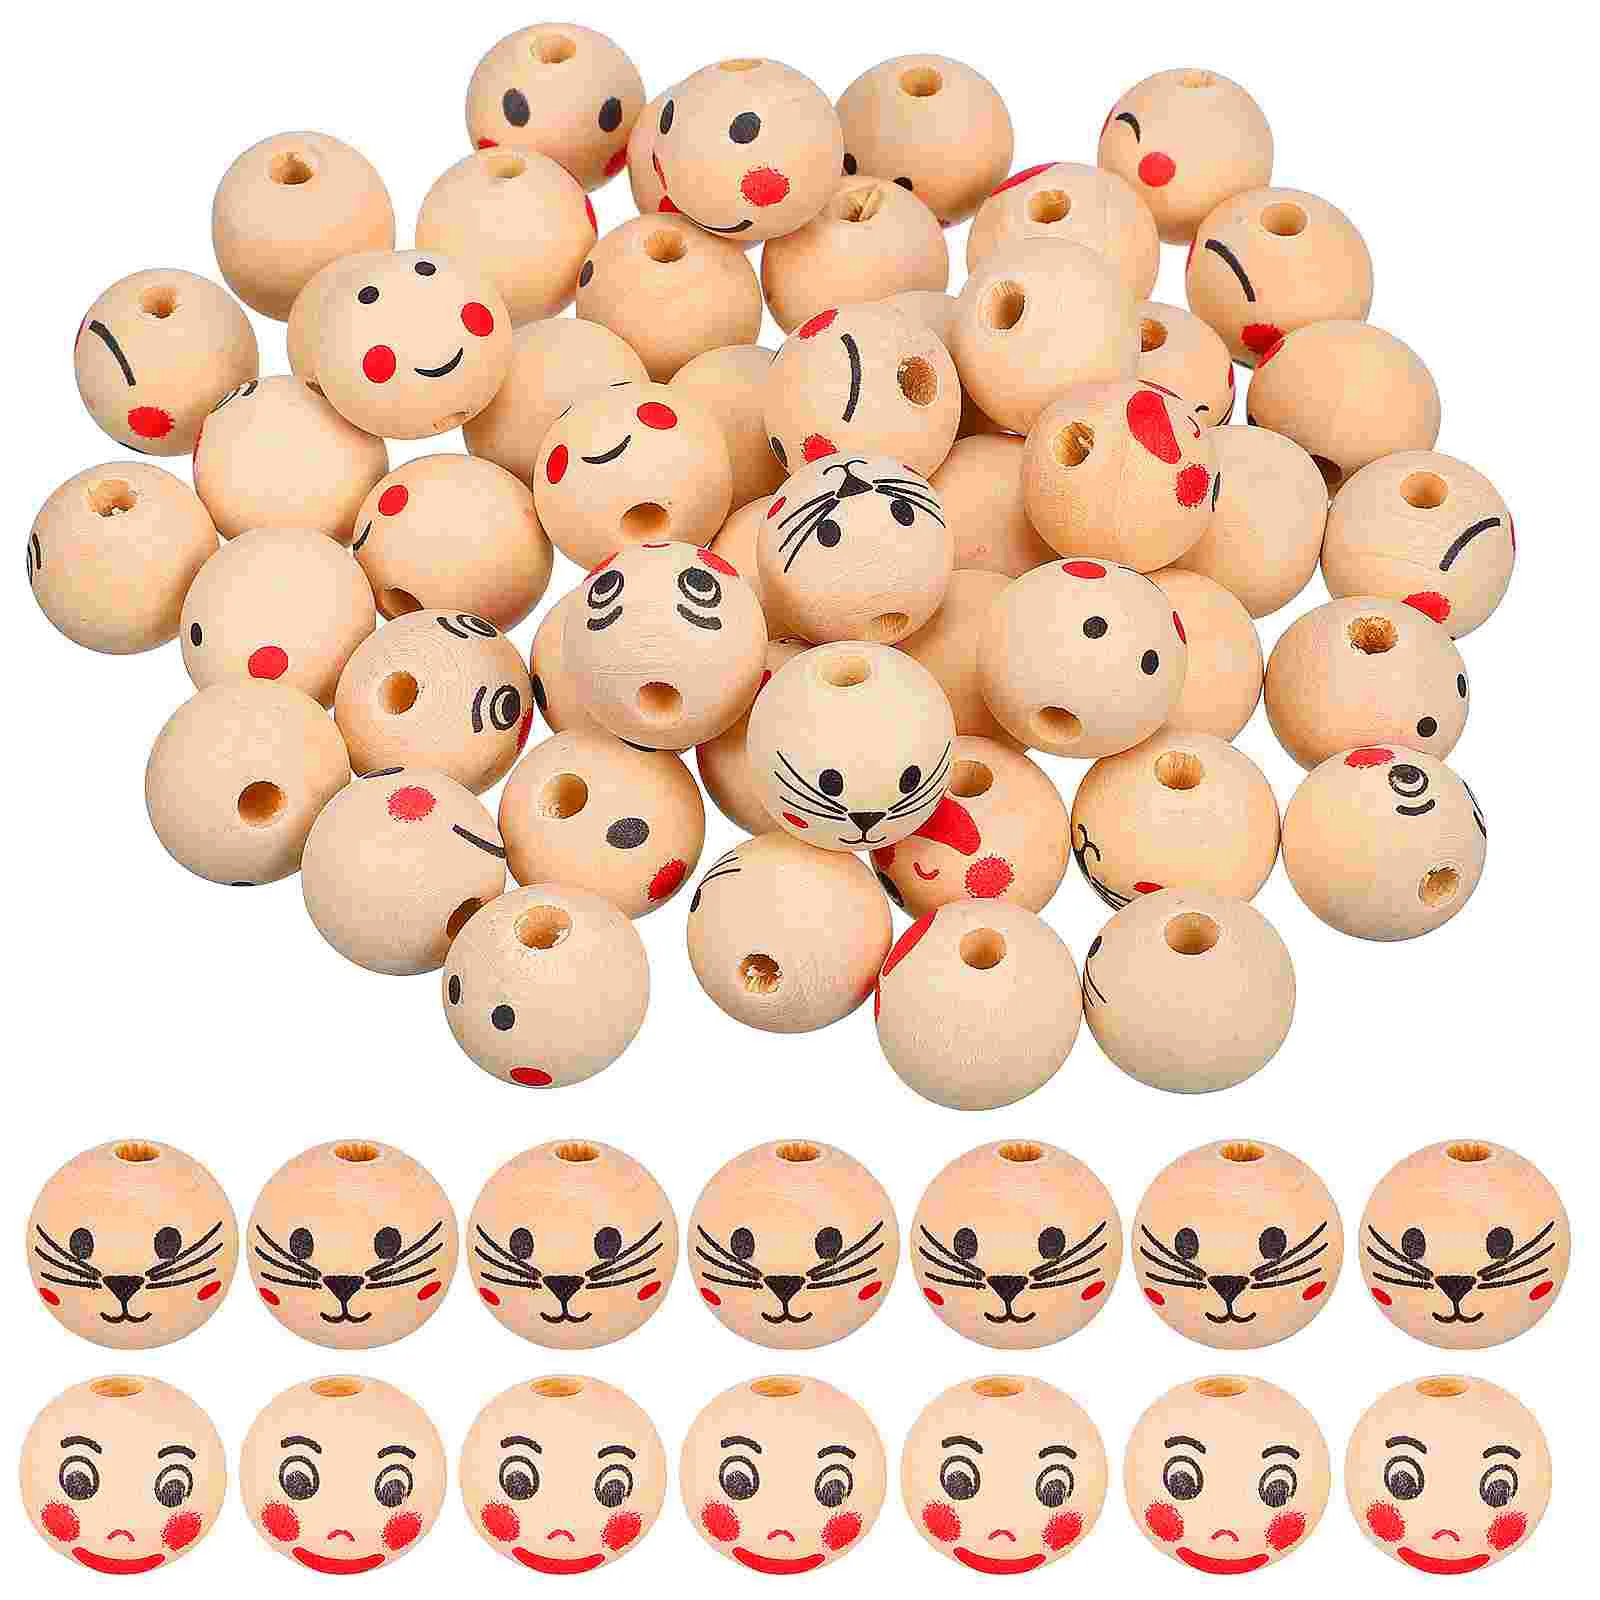 

50 Pcs Wood Rounds For Crafts Wooden Beads With Holes Decorative Jewelry Making Bulk